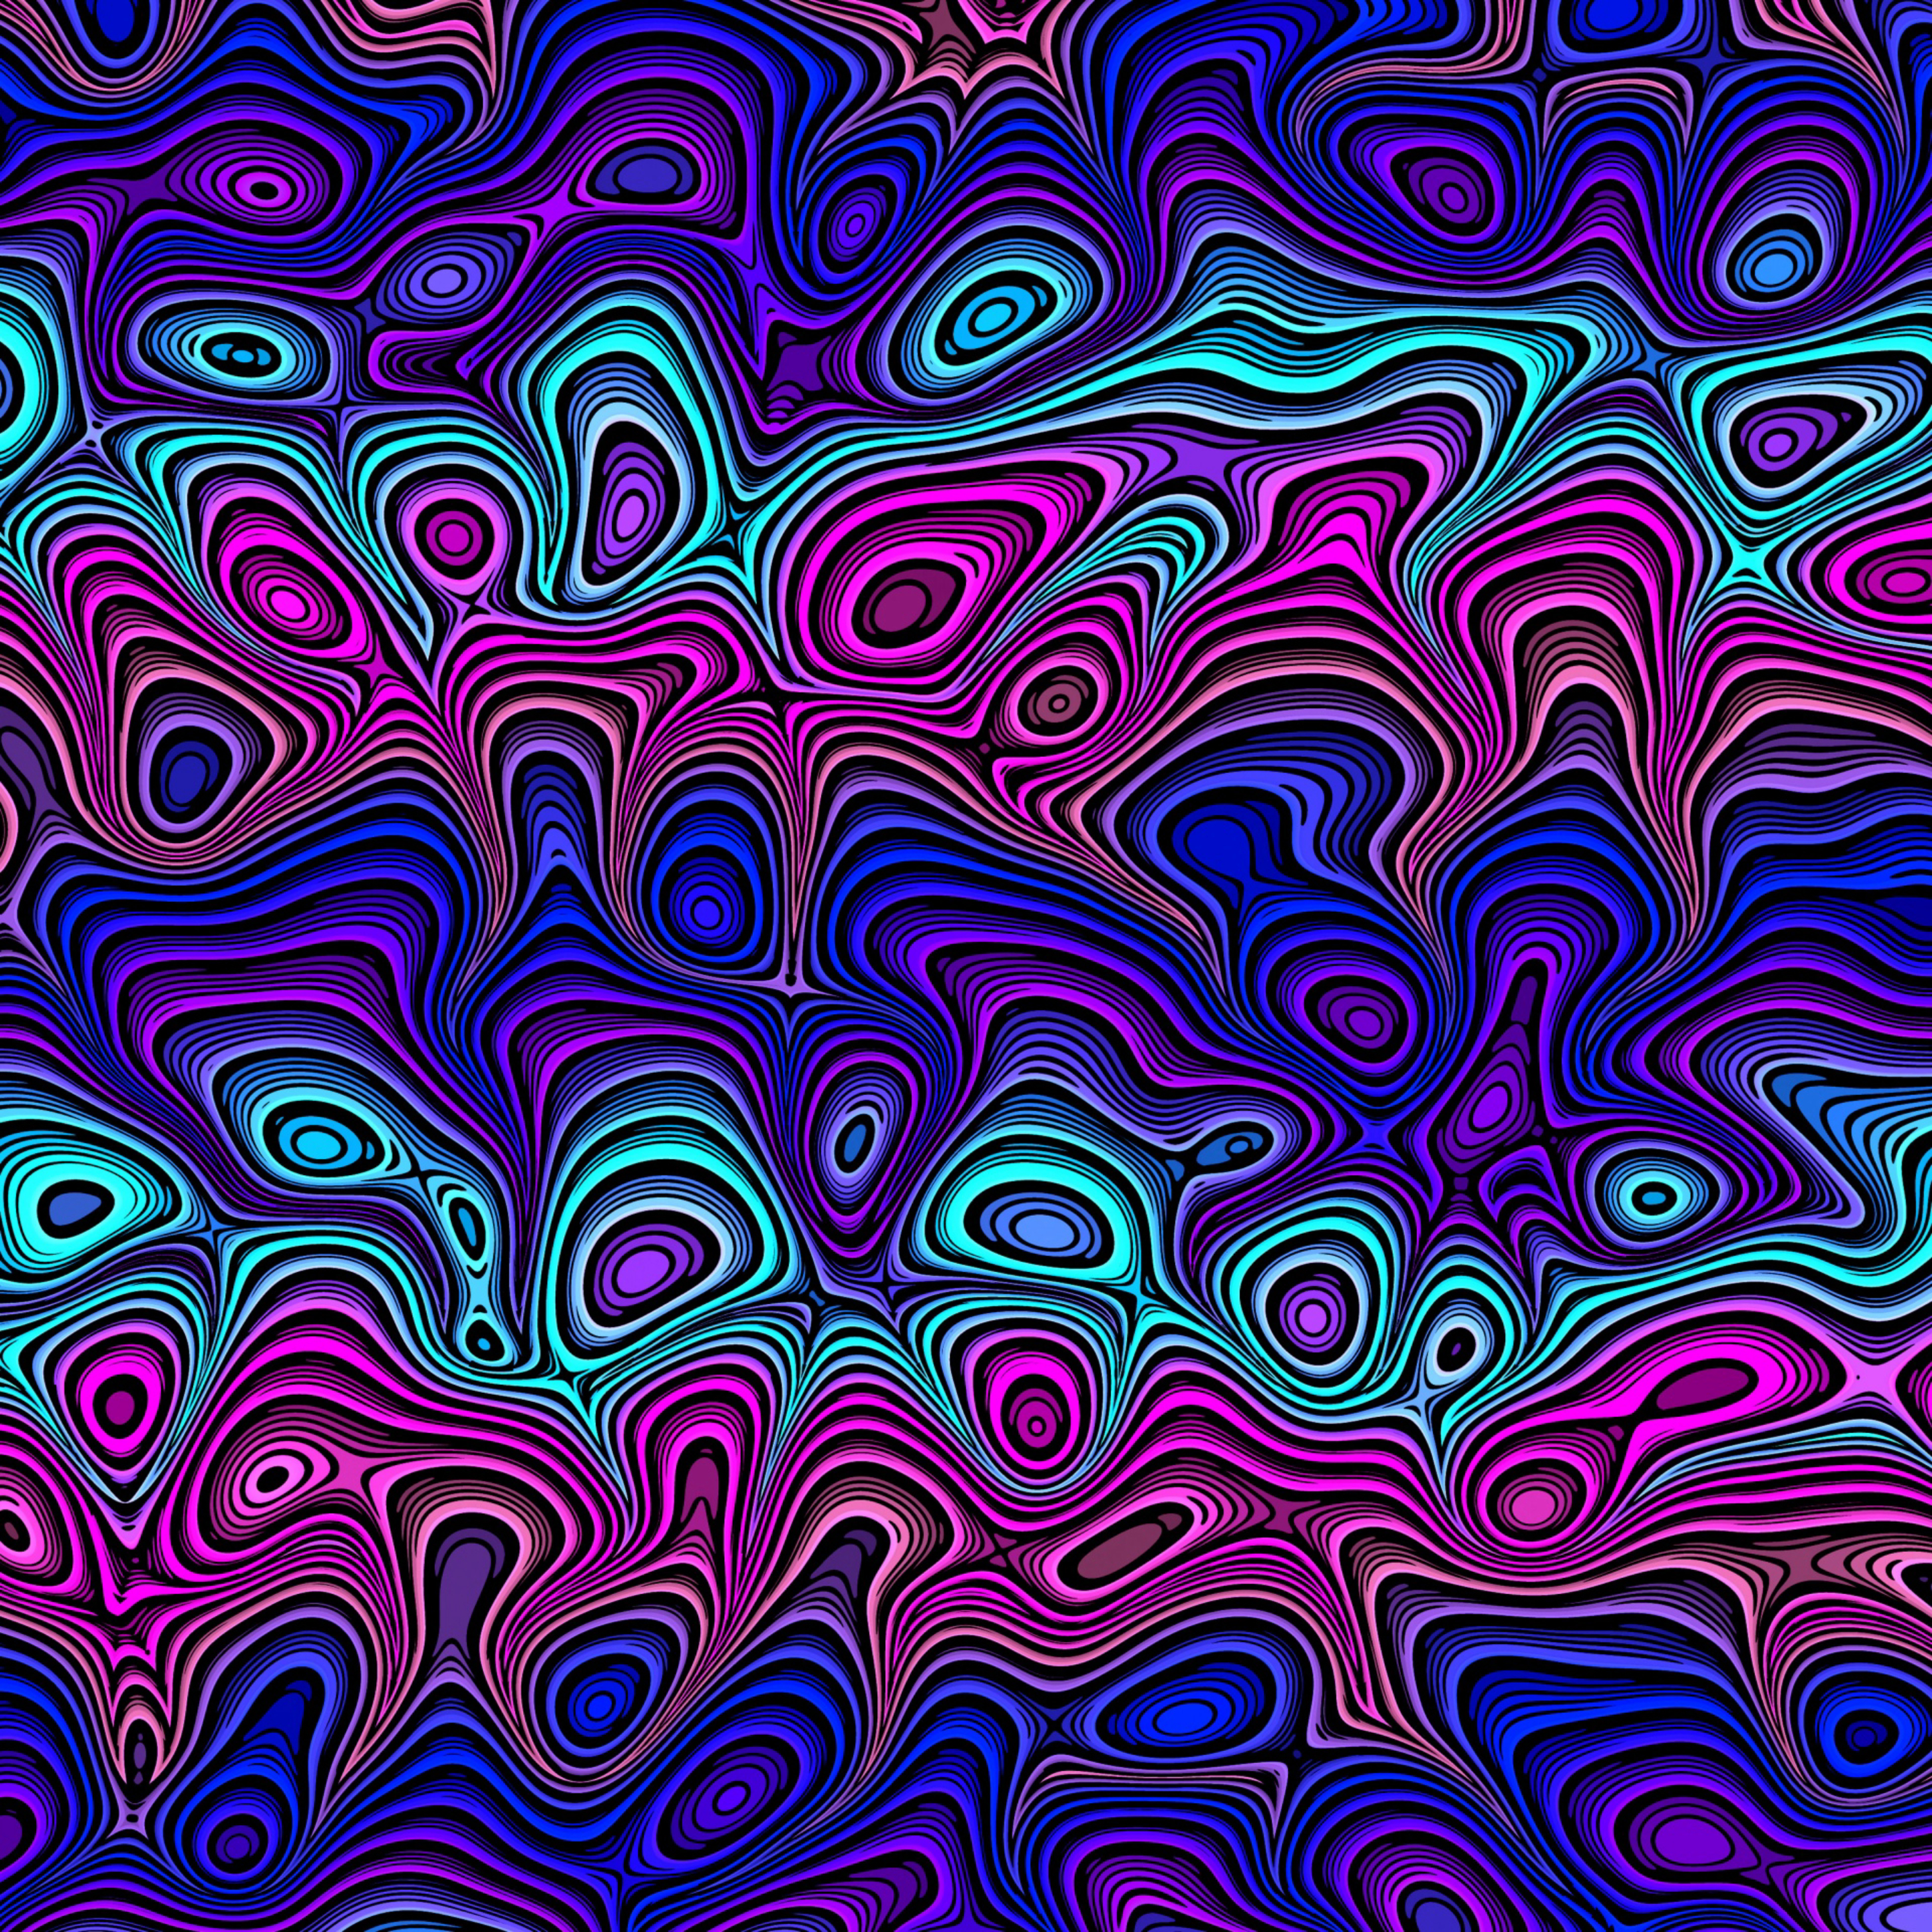 wavy, involute, lines, motley, multicolored, abstract, swirling